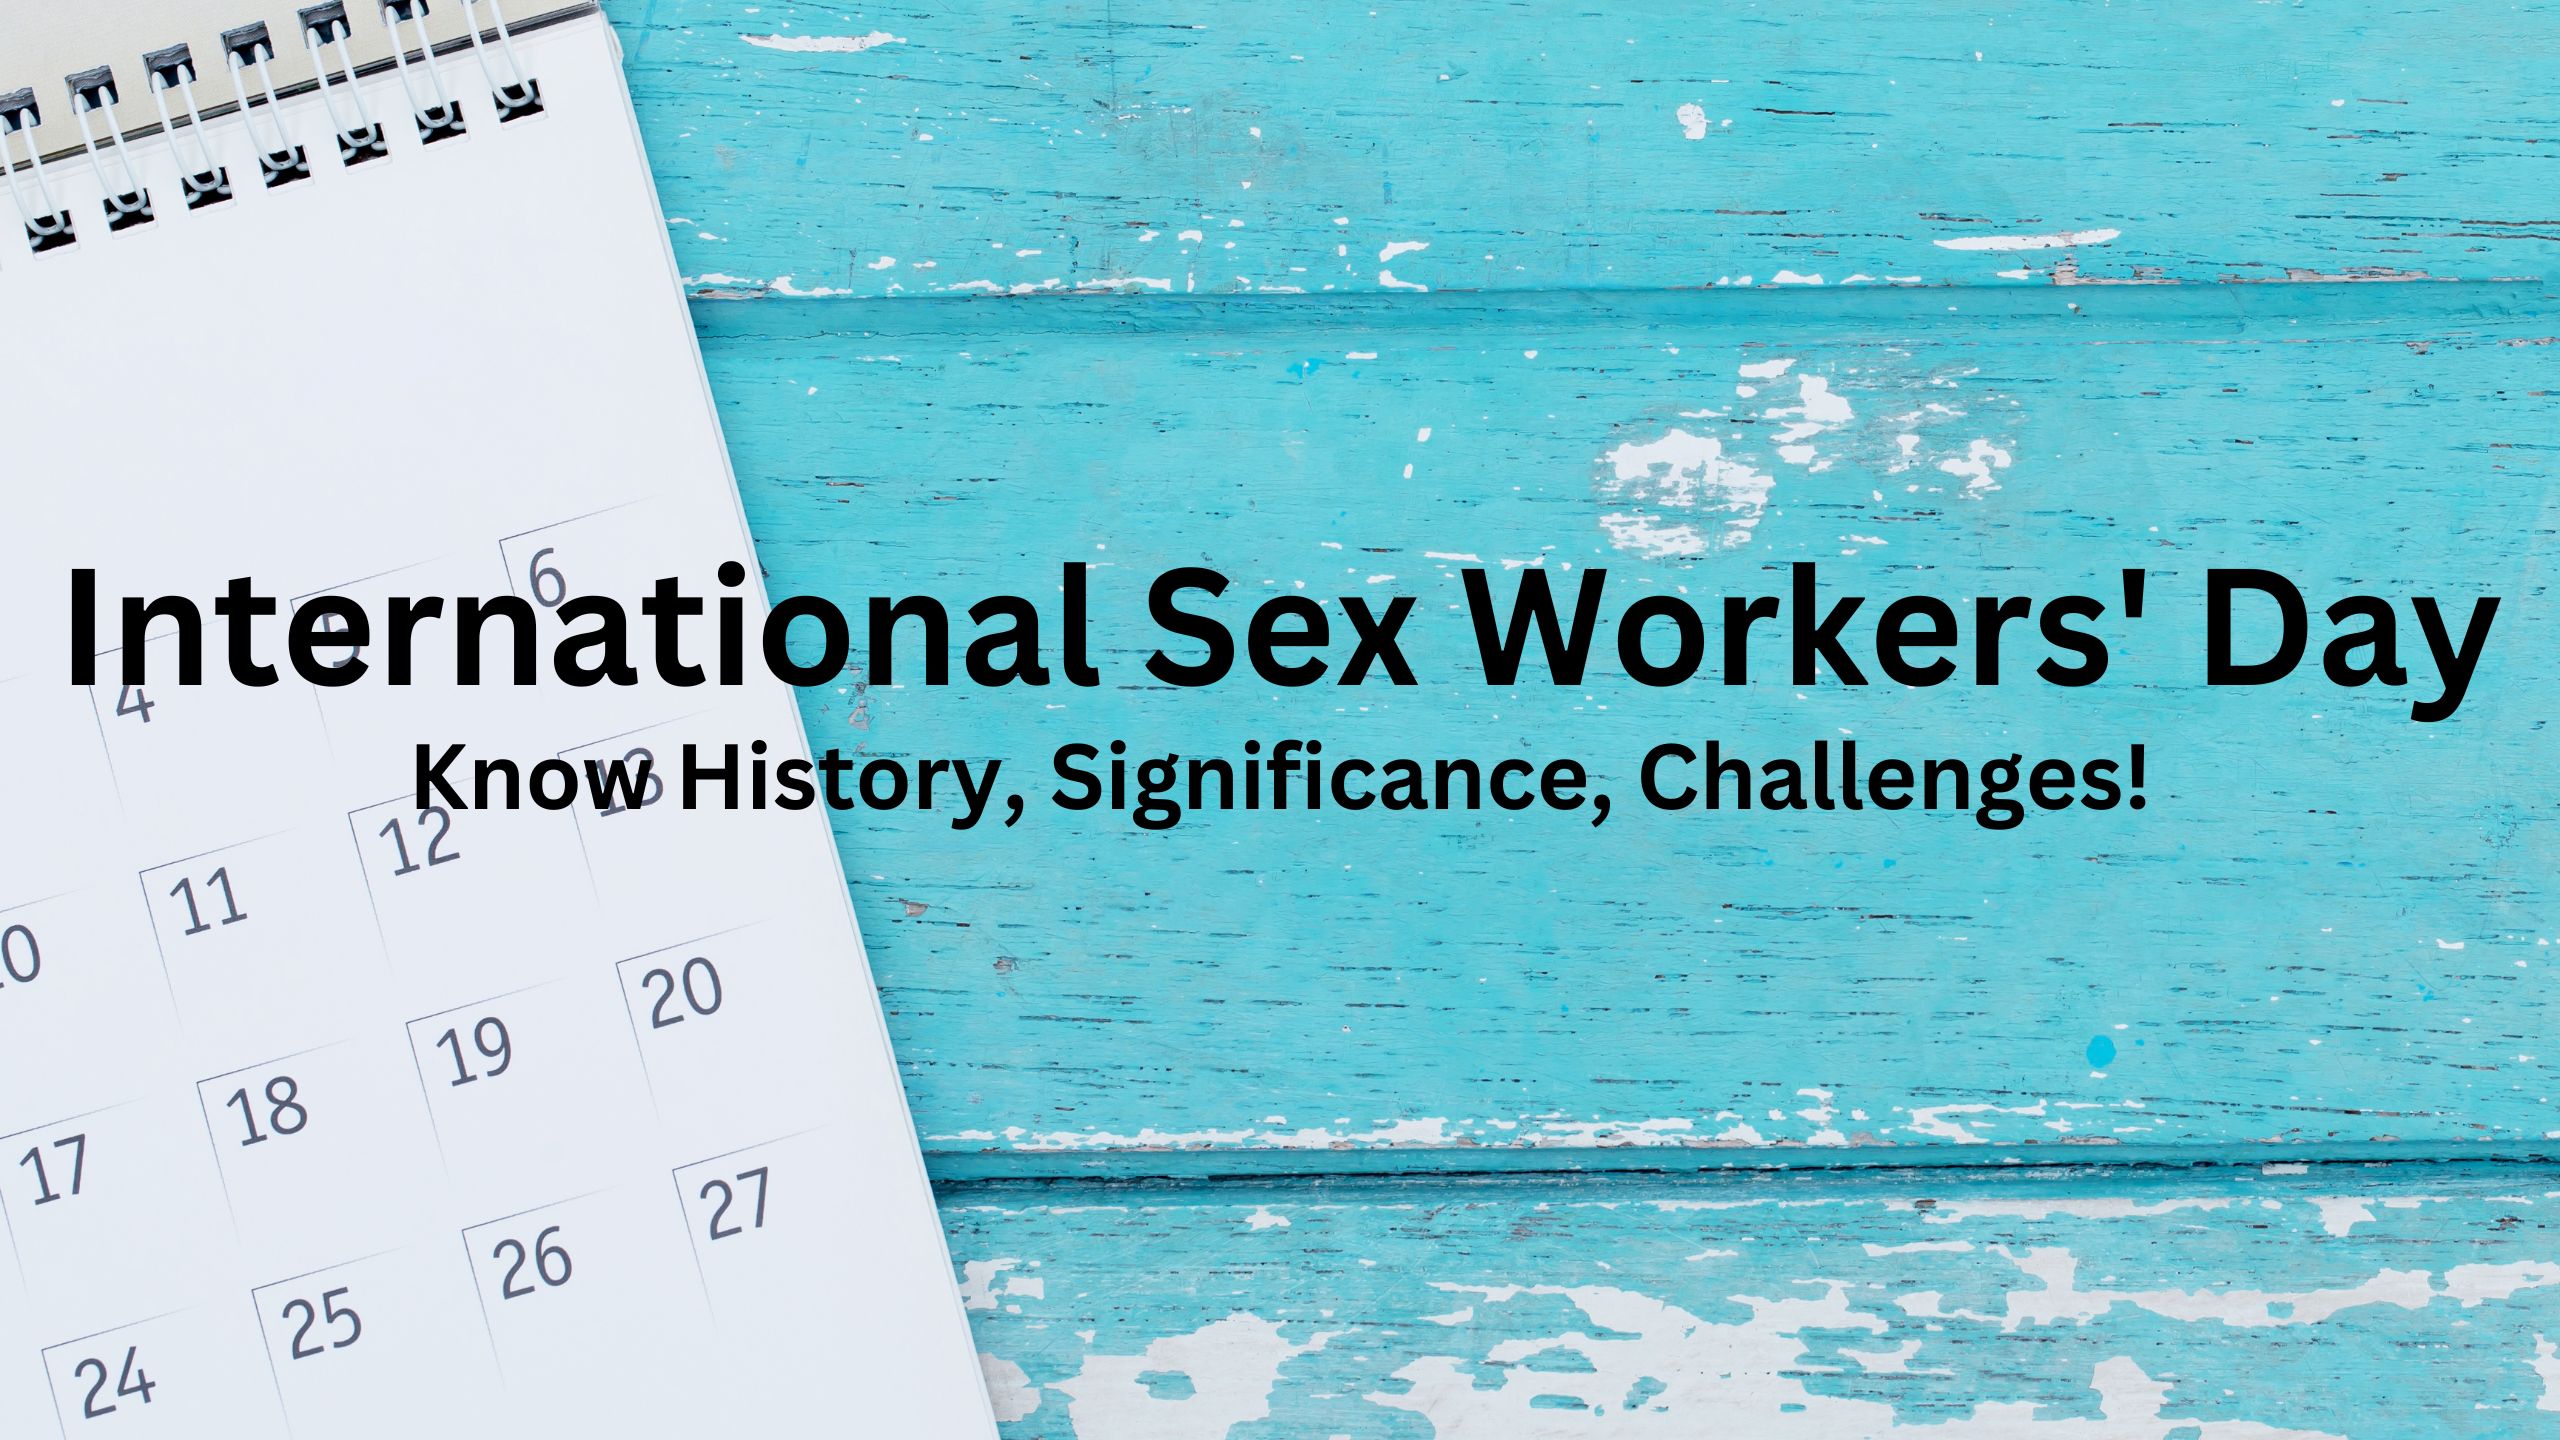 International Sex Workers Day Check Significance Human Rights 5030